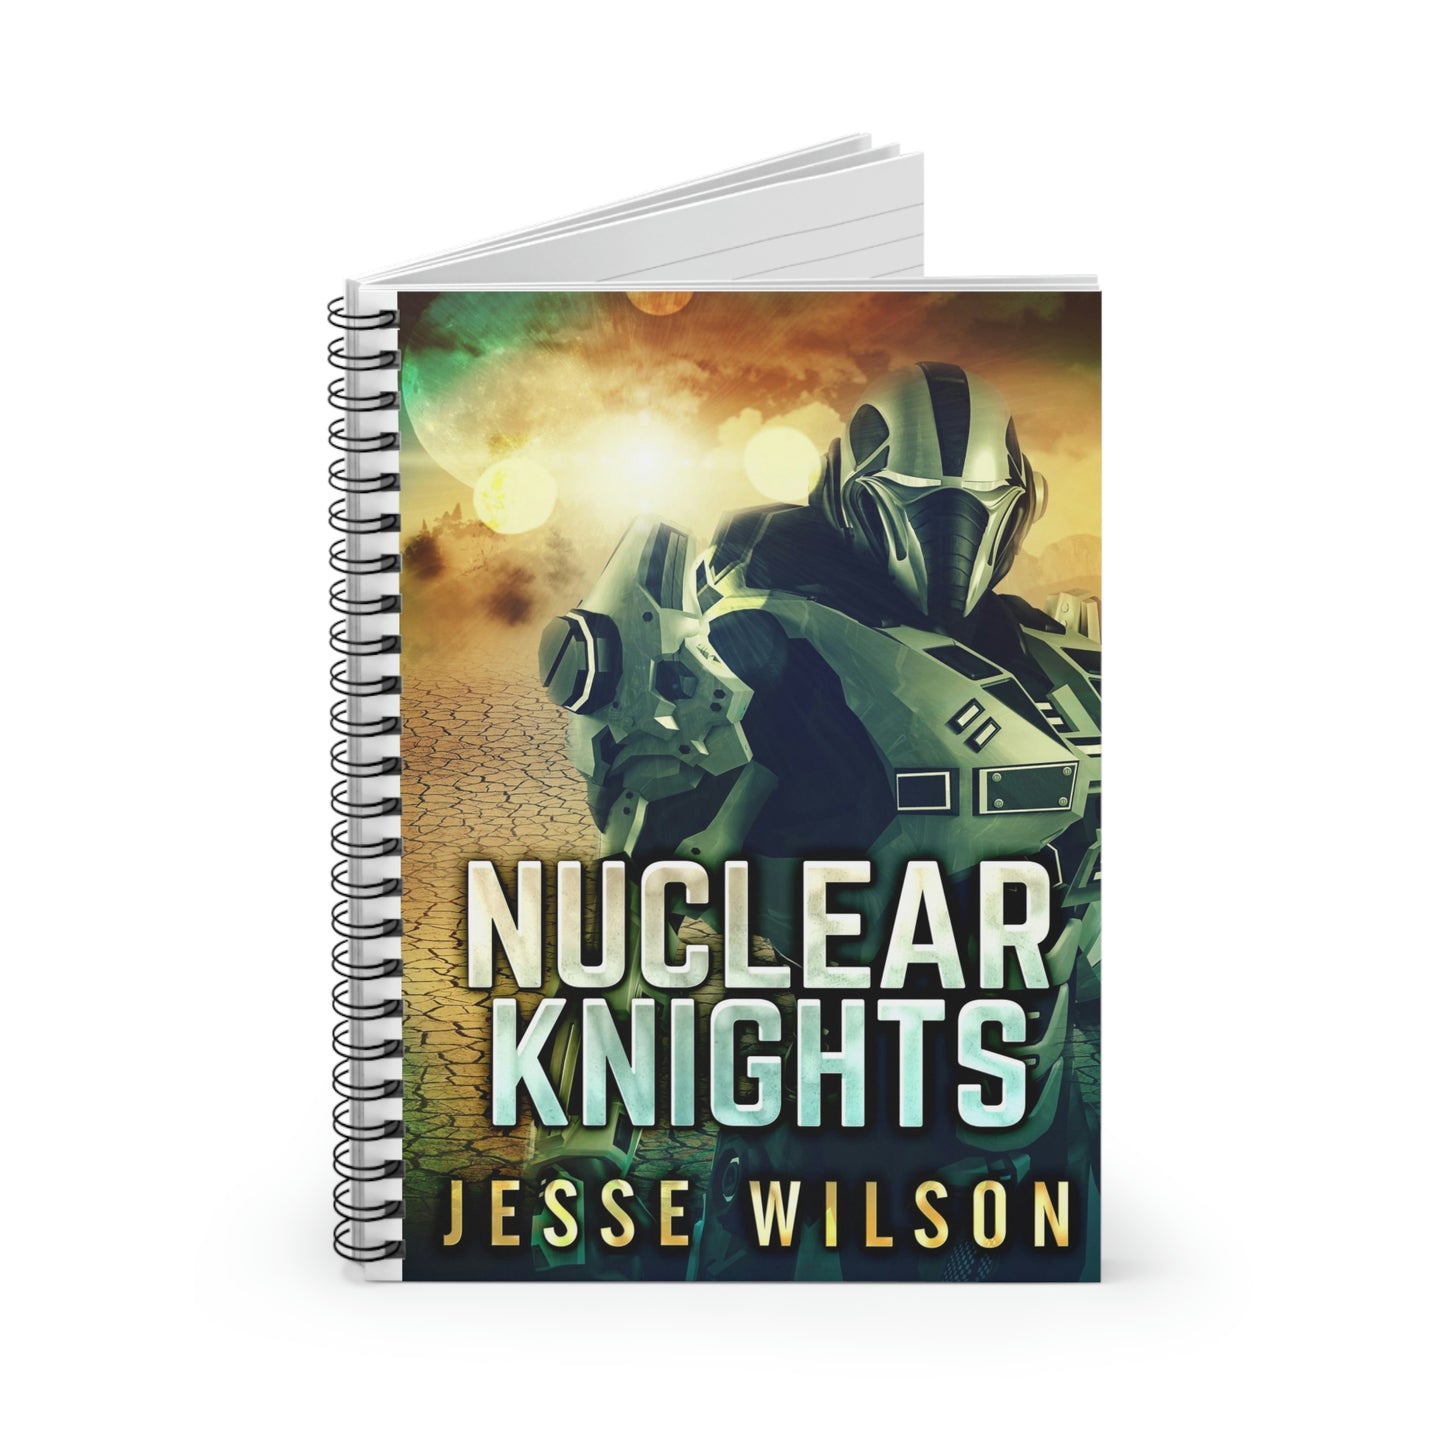 Nuclear Knights - Spiral Notebook